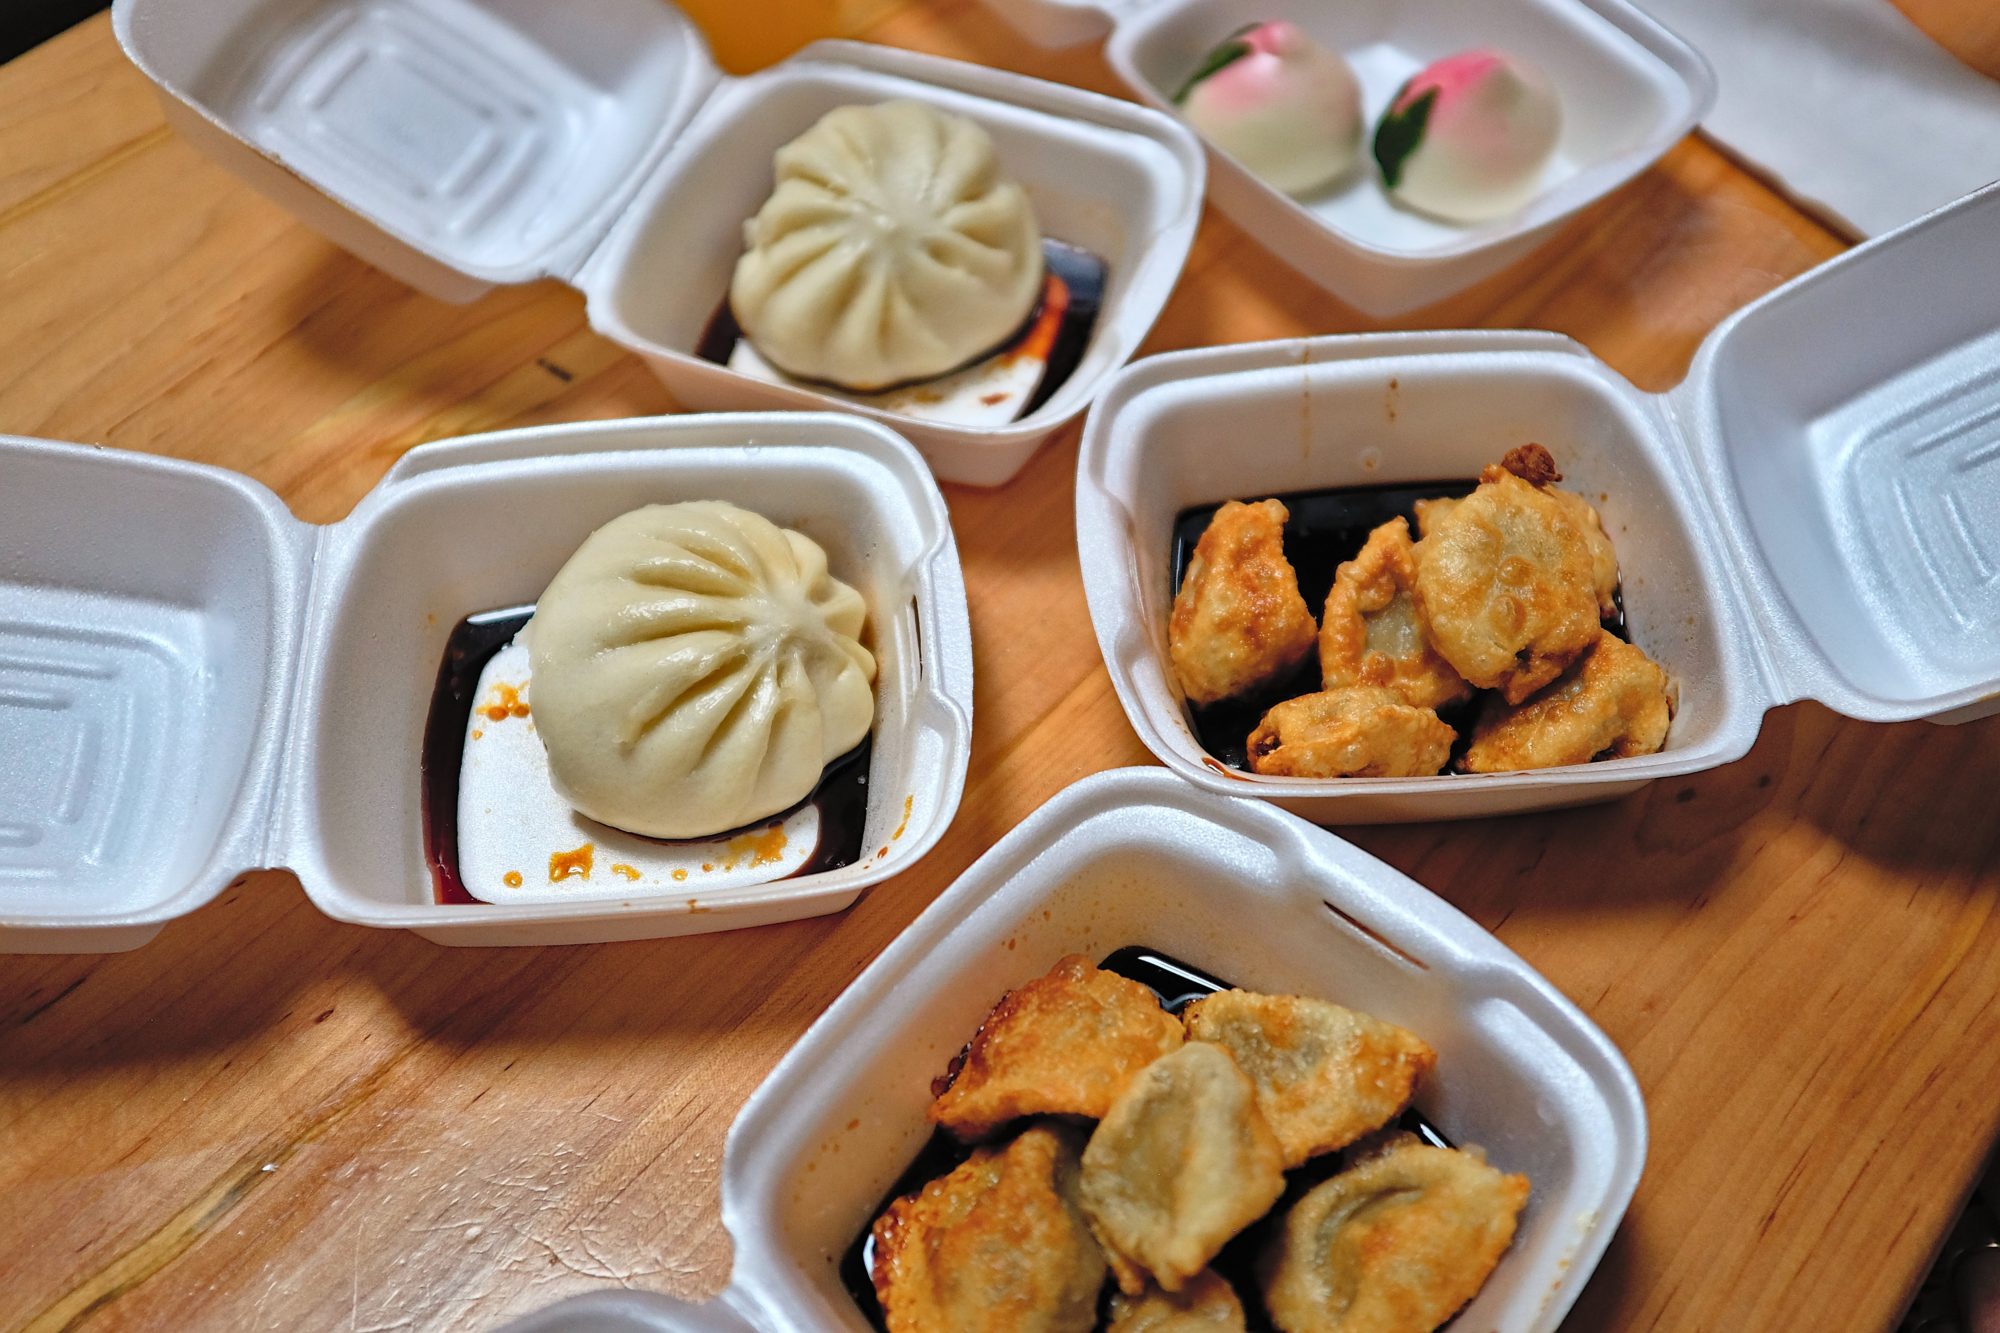 Takeout boxes with steamed buns and dumplings